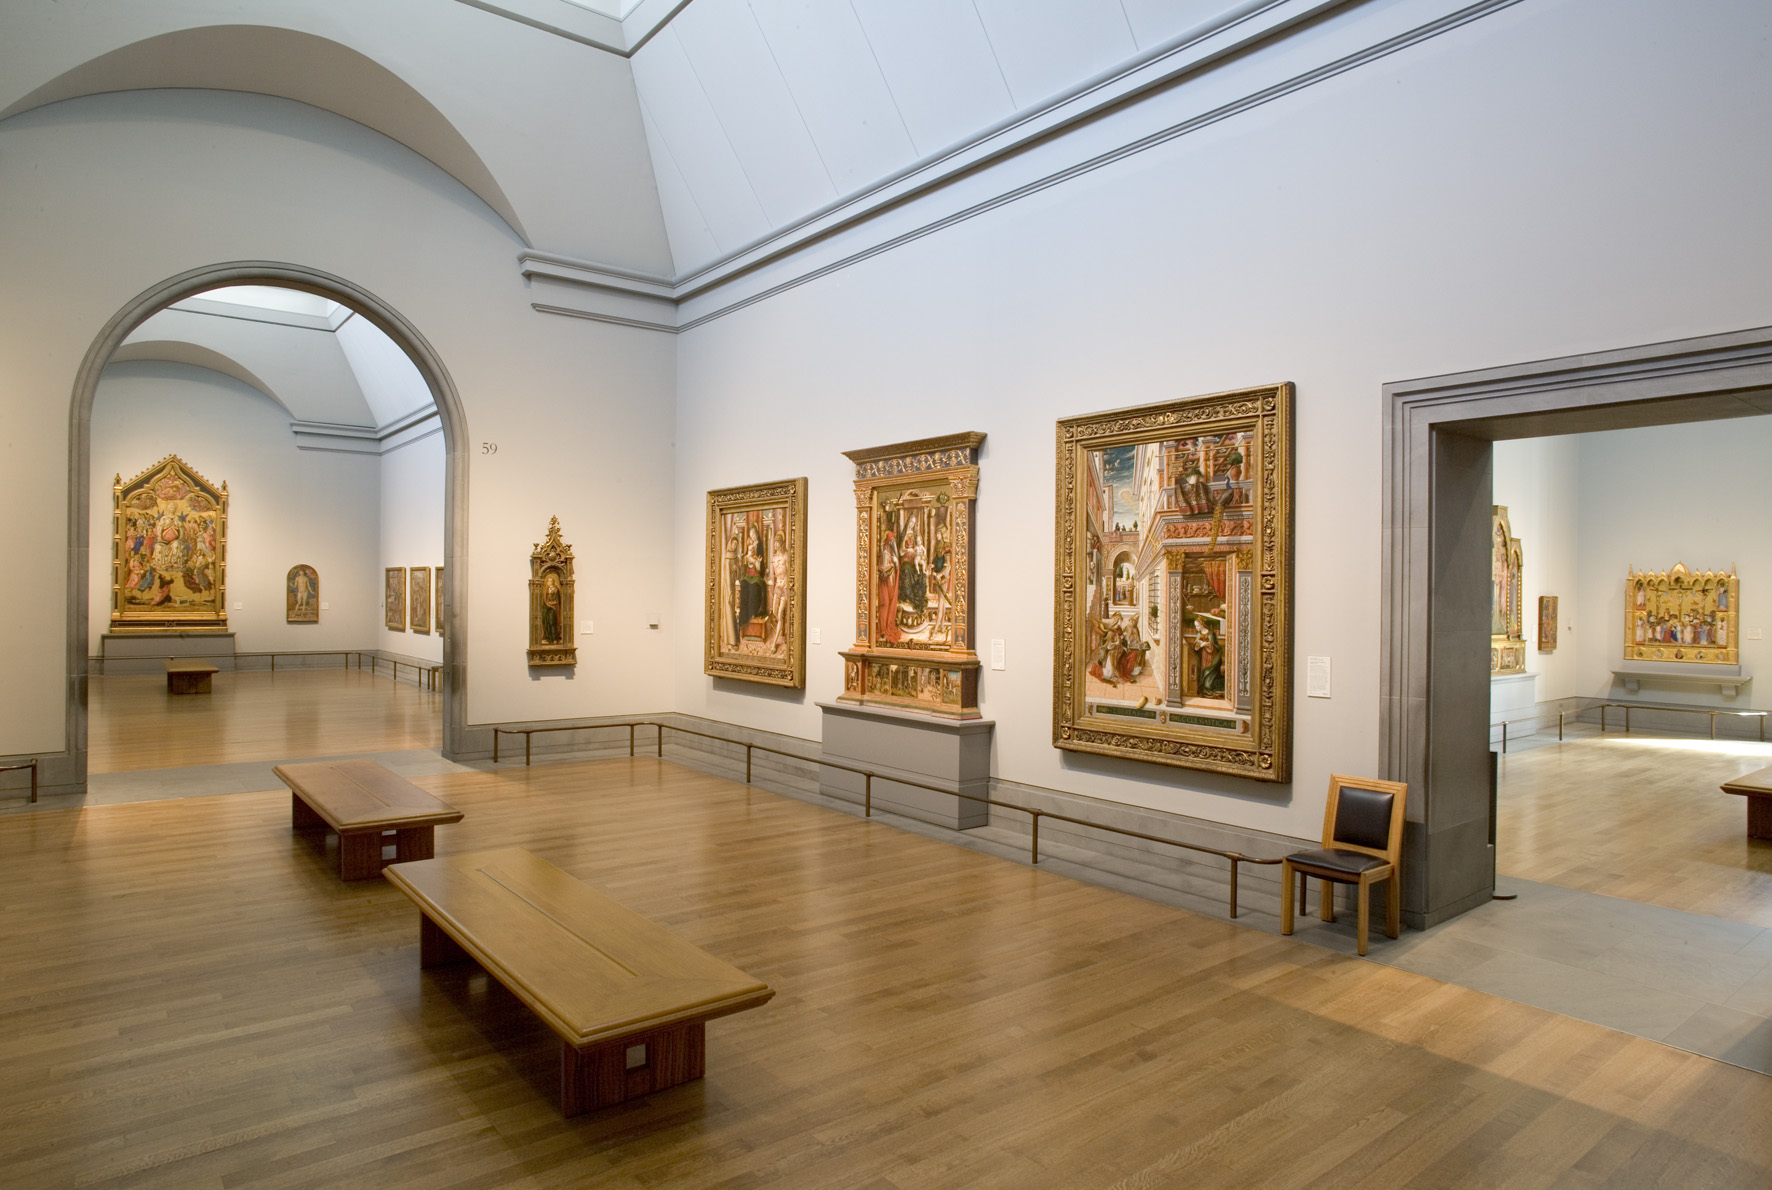 Applied to design wayfinding for the National Gallery - Applied